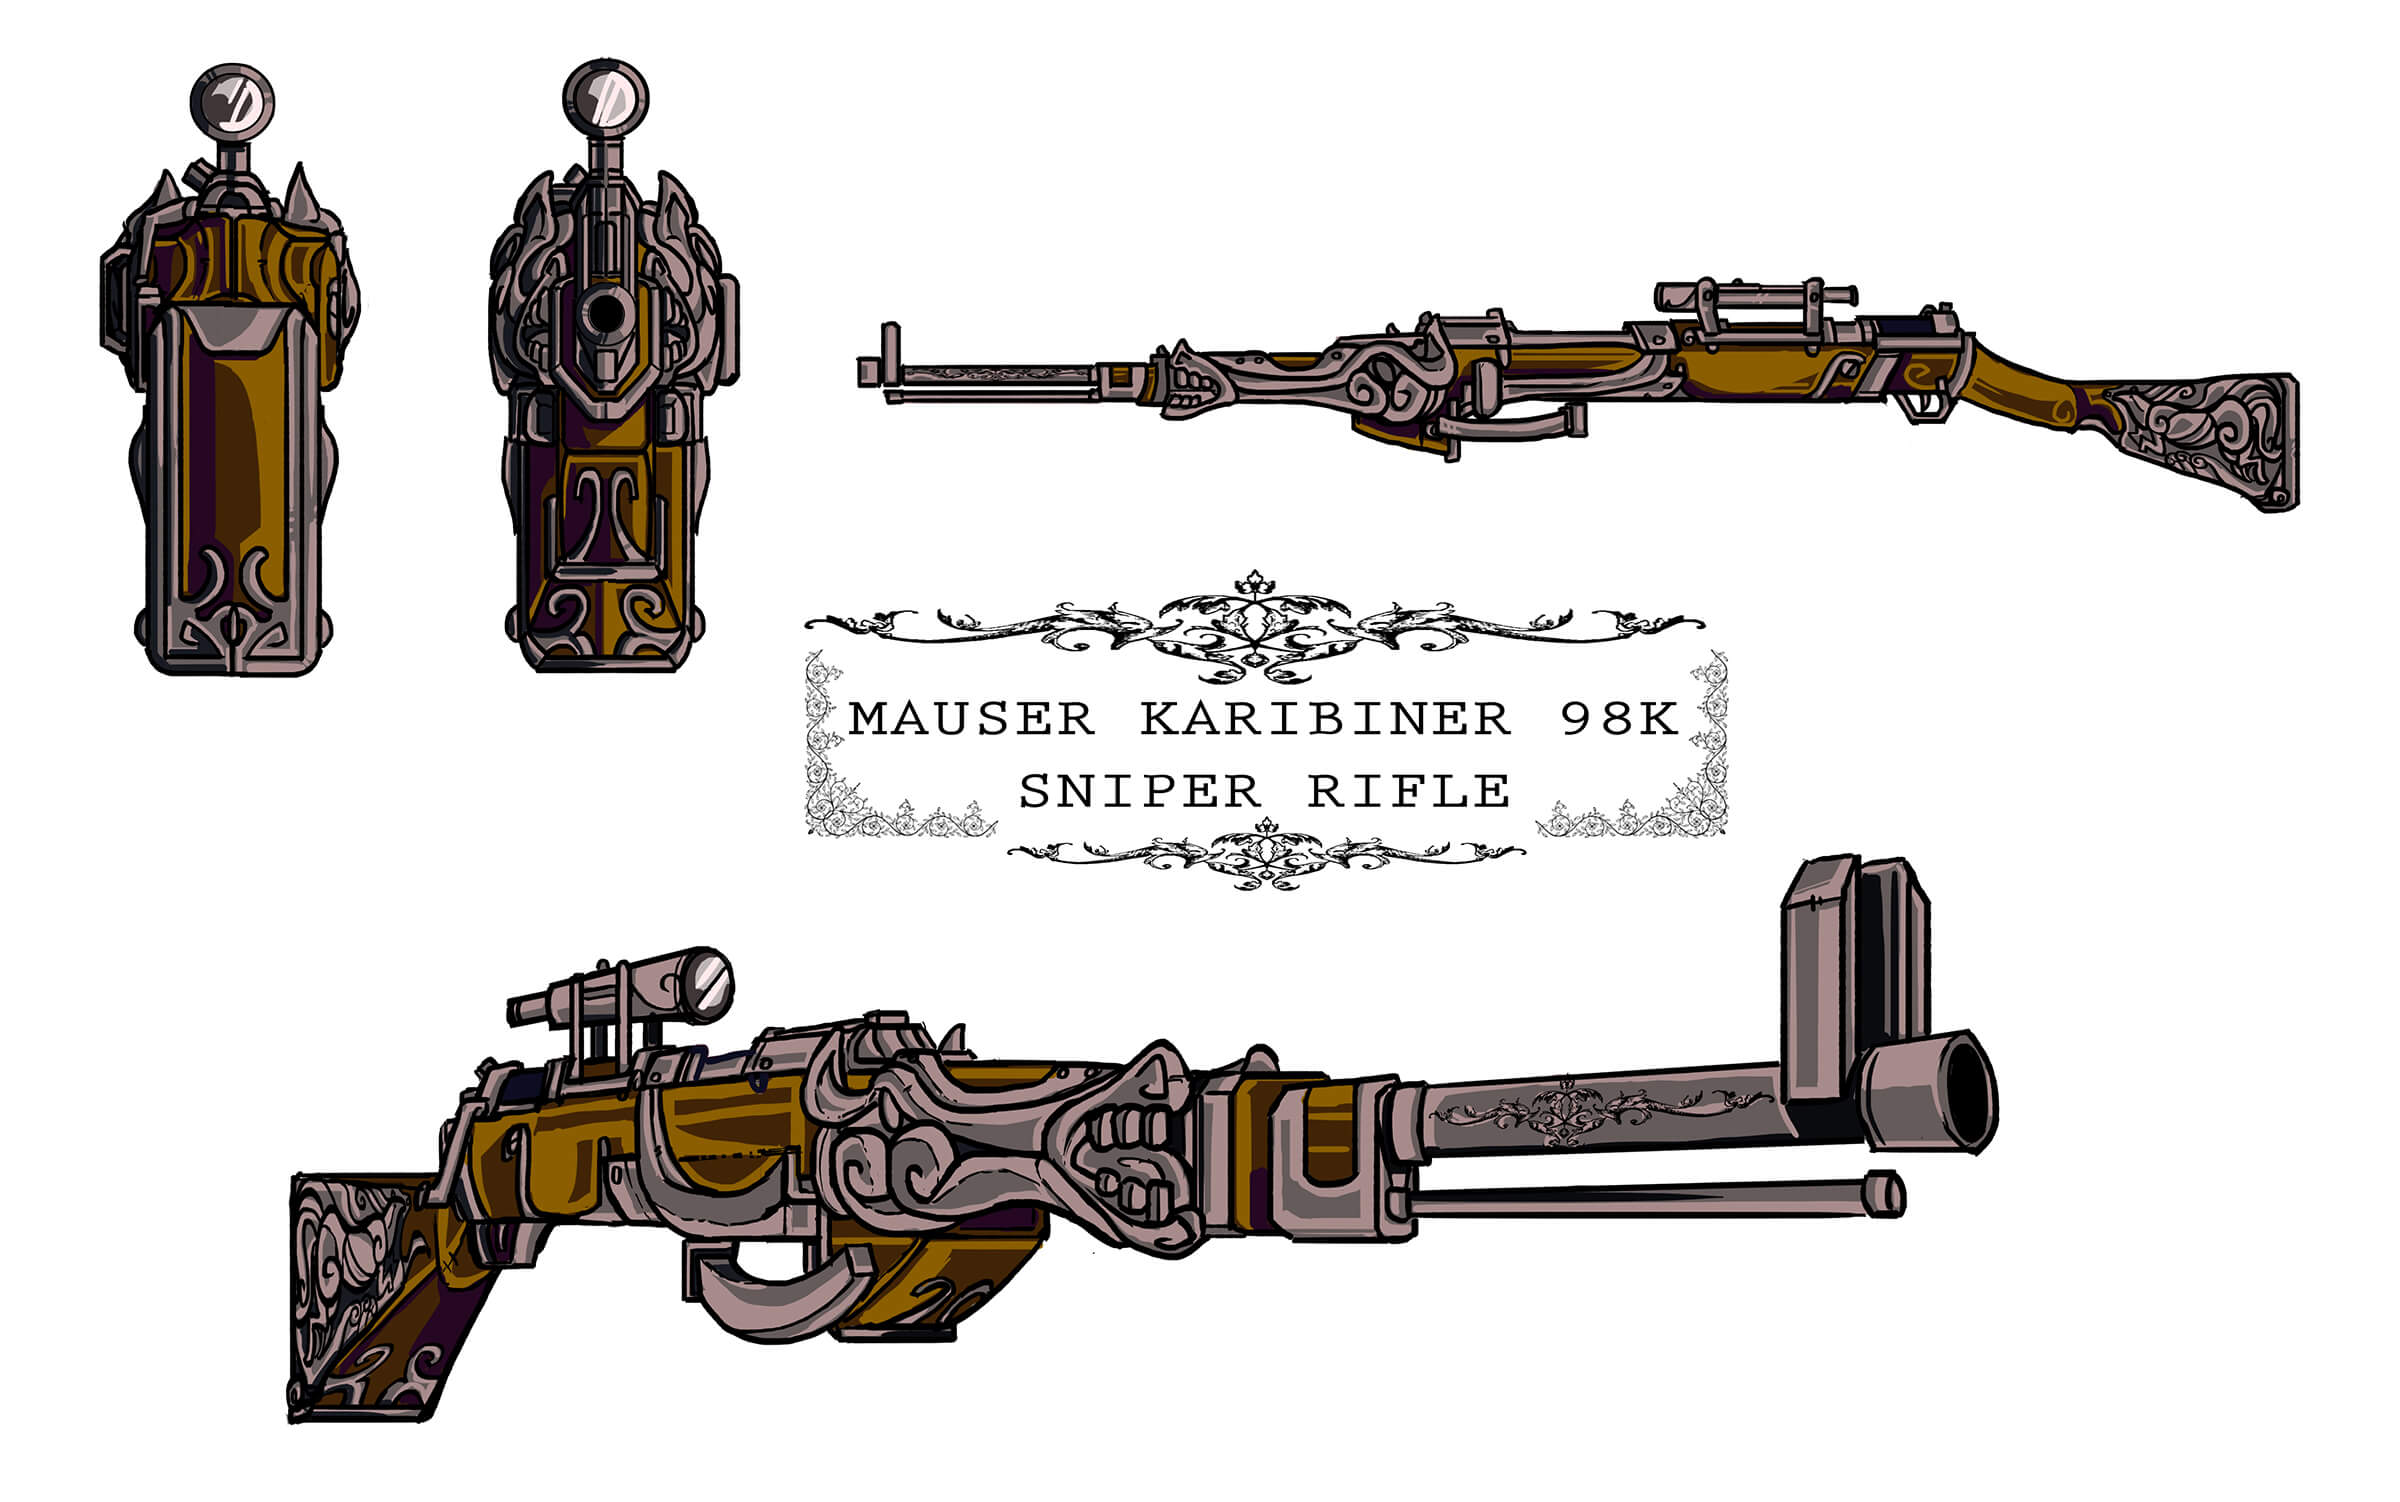 Ornate Mauser sniper rifle decorated with intricate metal flourishes, seen from several angles.